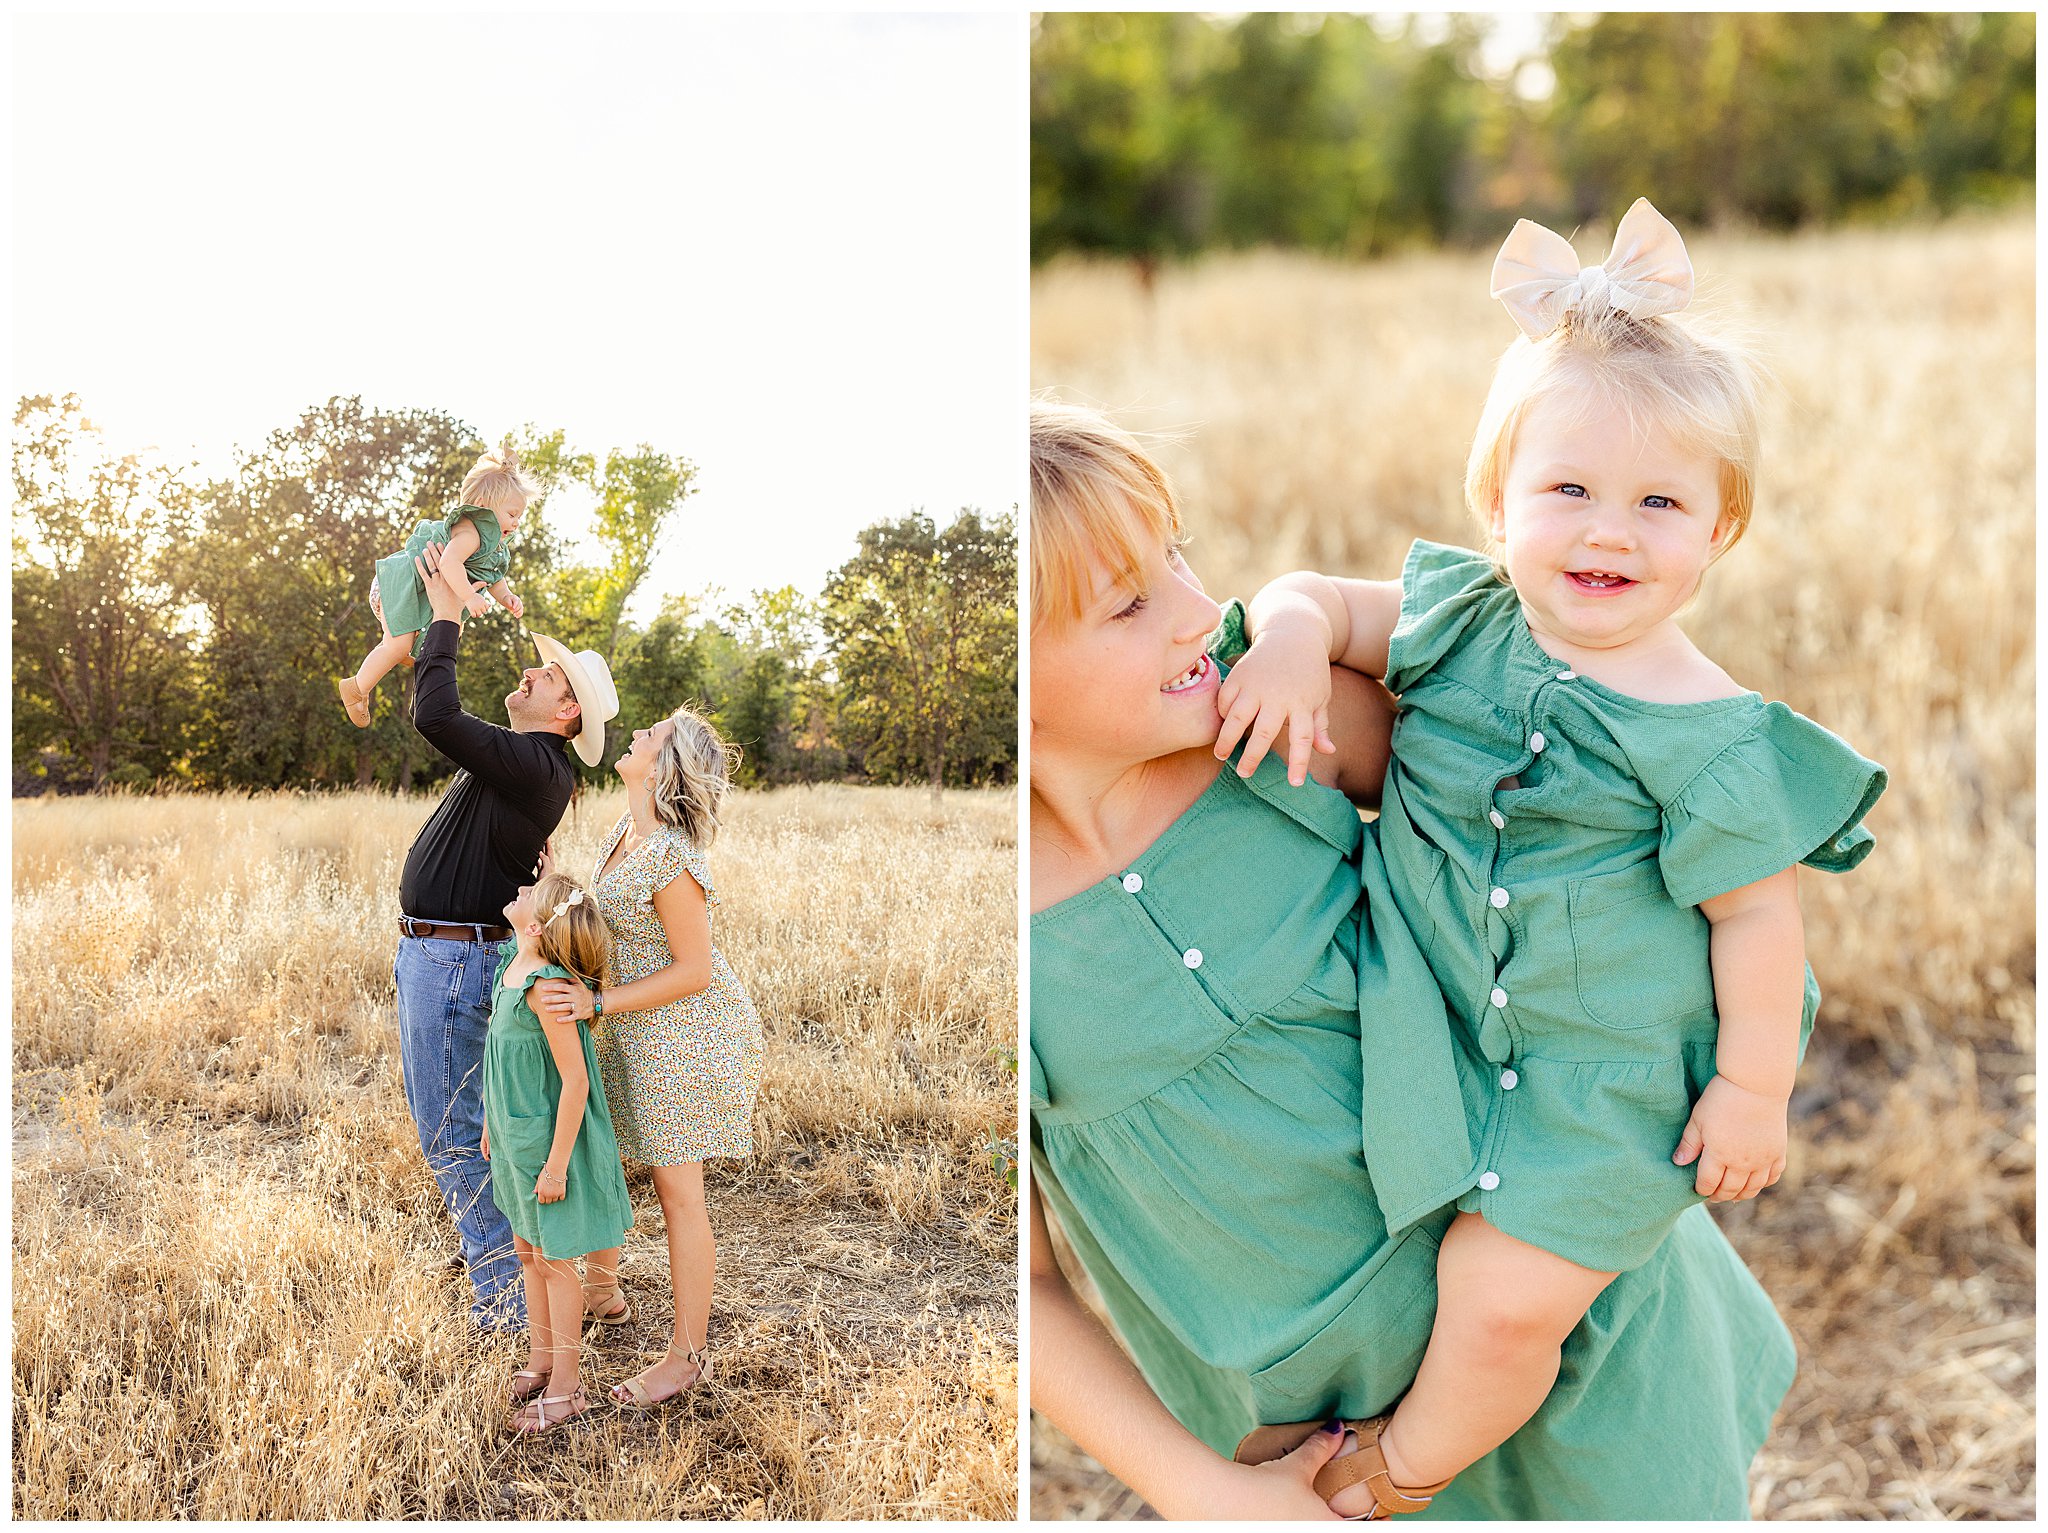 Grass Field Family Session Chico CA Summer August One Year Old Baby Girl Dress Dresses Cowboy Hat Boots,